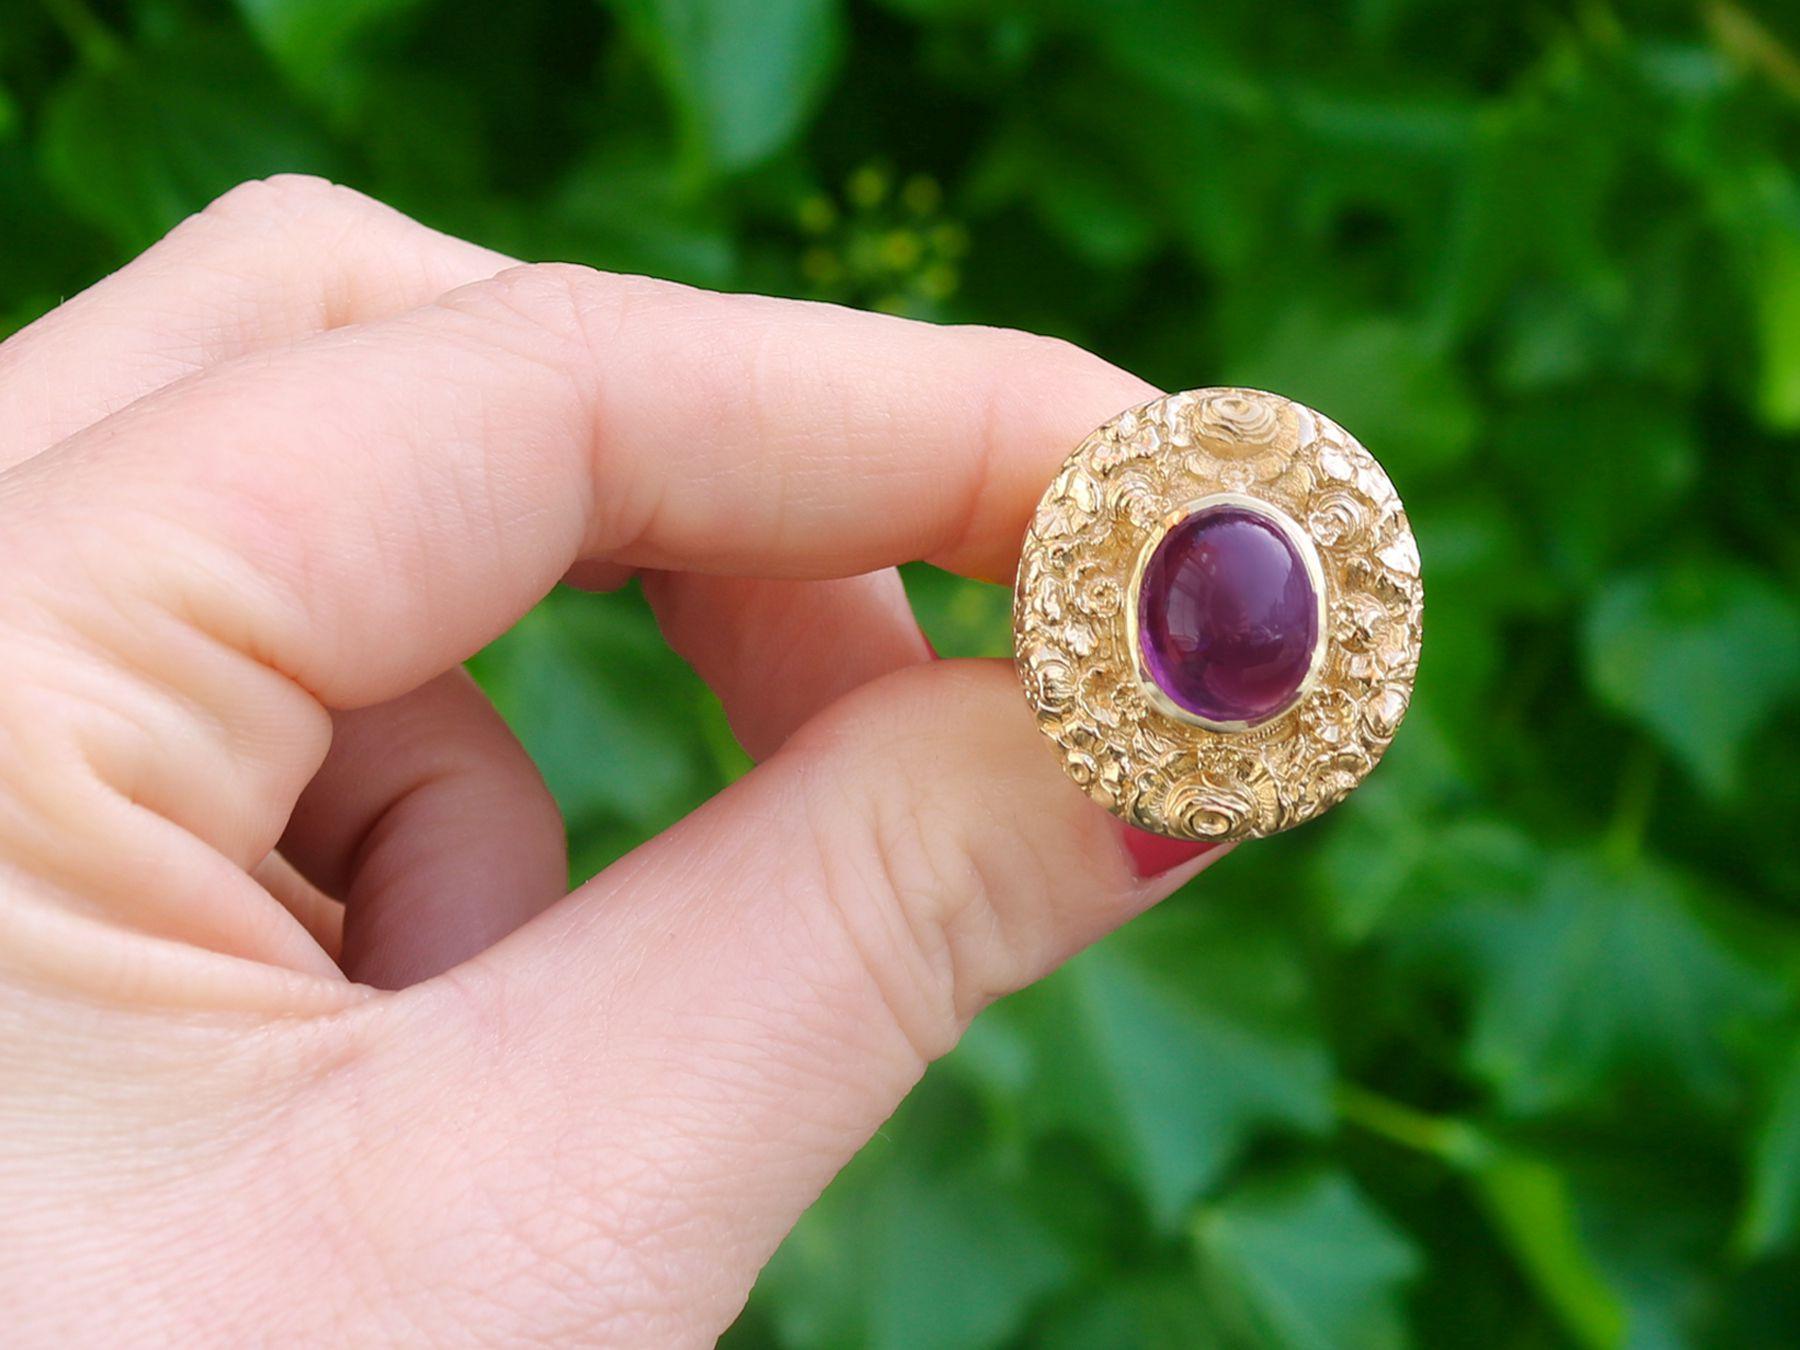 An impressive vintage 3.77 carat amethyst and 9 karat yellow gold cocktail ring; part of our diverse amethyst jewelry and estate jewelry collections.

This fine and impressive vintage amethyst ring has been crafted in 9k yellow gold.

The ring has